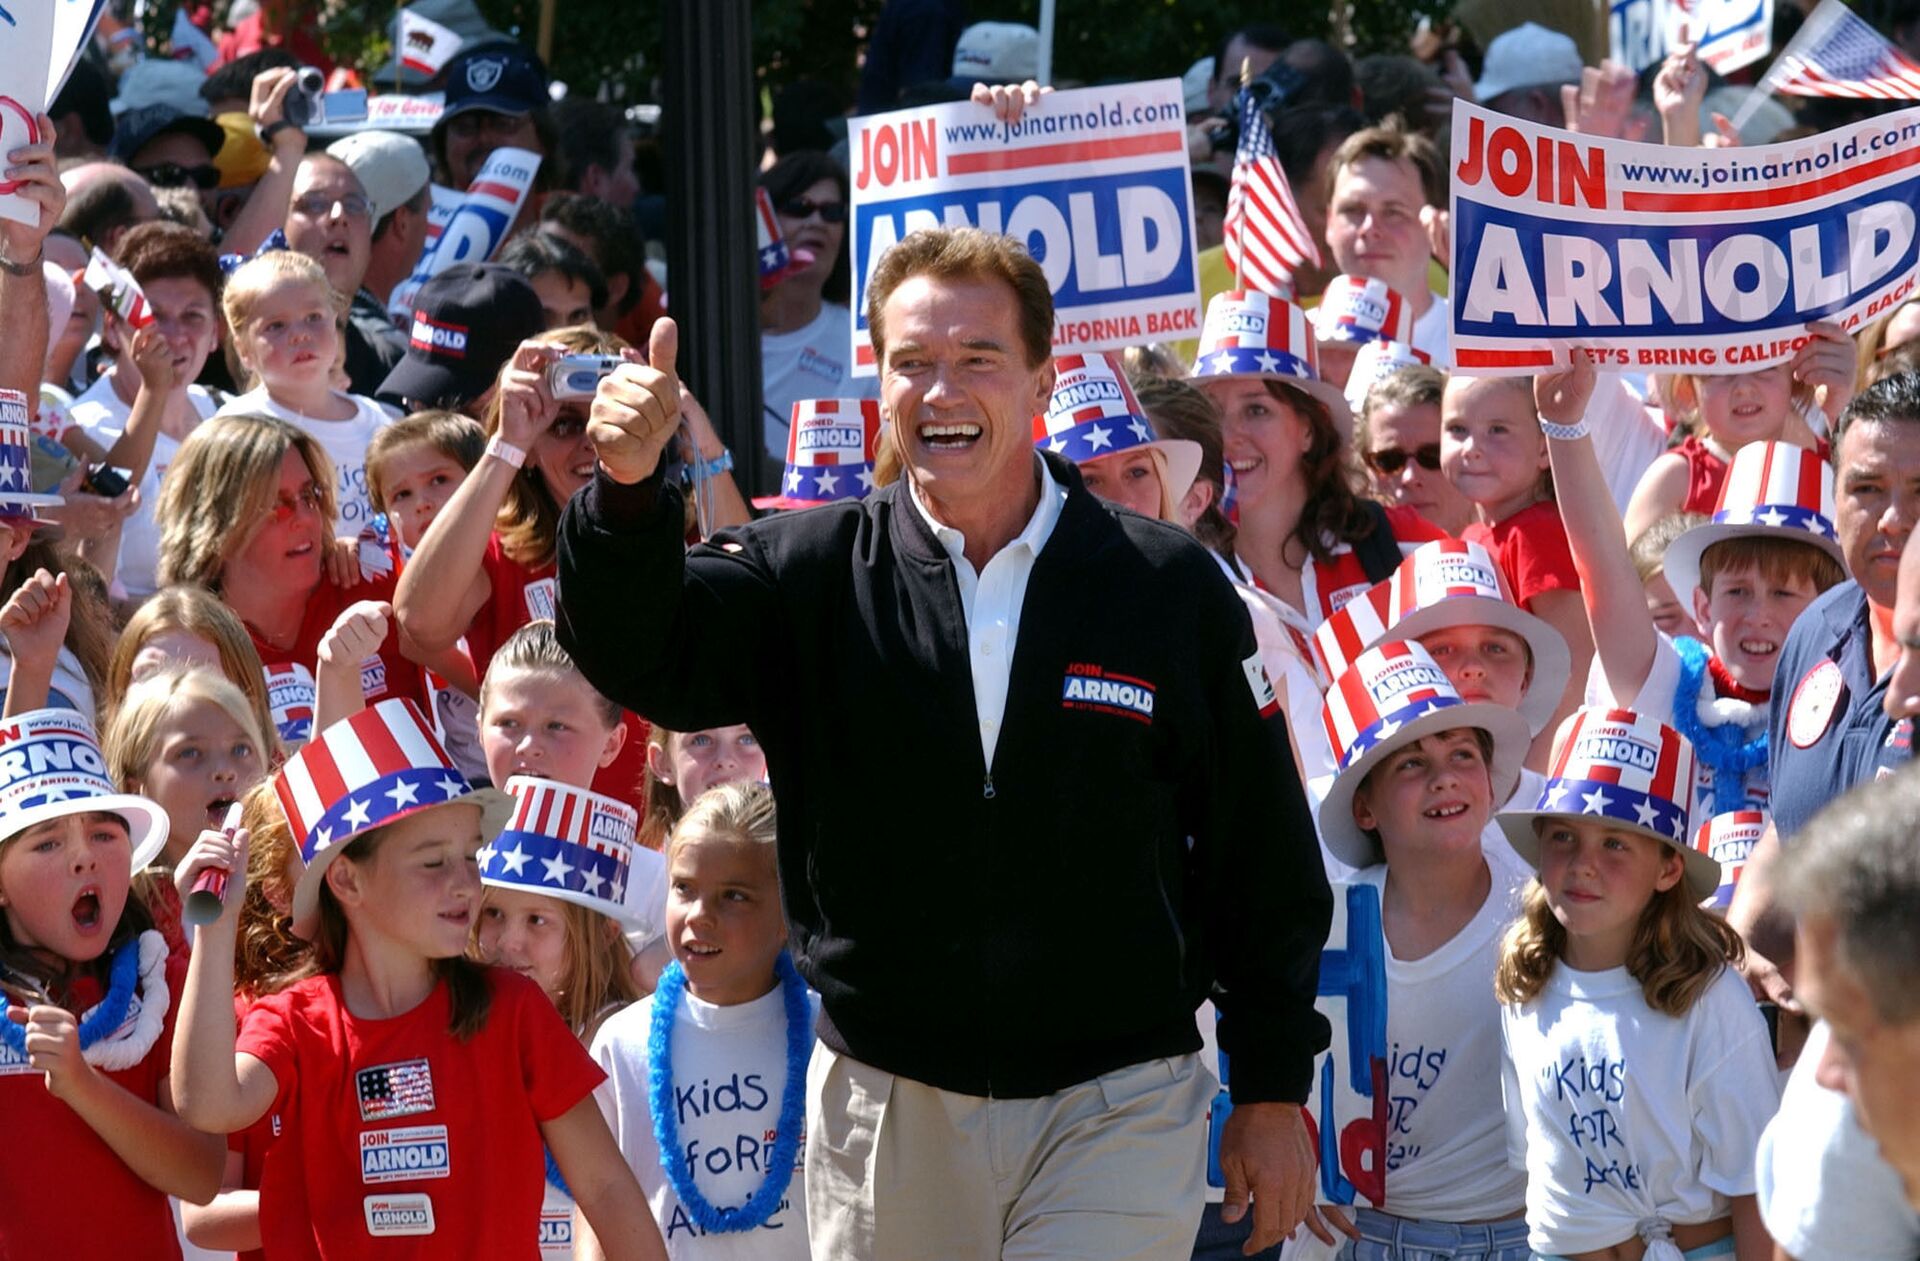  In this Oct. 5, 2003, file photo, Republican candidate for California governor Arnold Schwarzenegger walks up the steps to the state Capitol surrounded by children and waving to supporters during a campaign rally in Sacramento, Calif. California Gov. Gavin Newsom is facing a possible recall election as the nation's most populous state struggles to emerge from the coronavirus crisis - Sputnik International, 1920, 07.09.2021